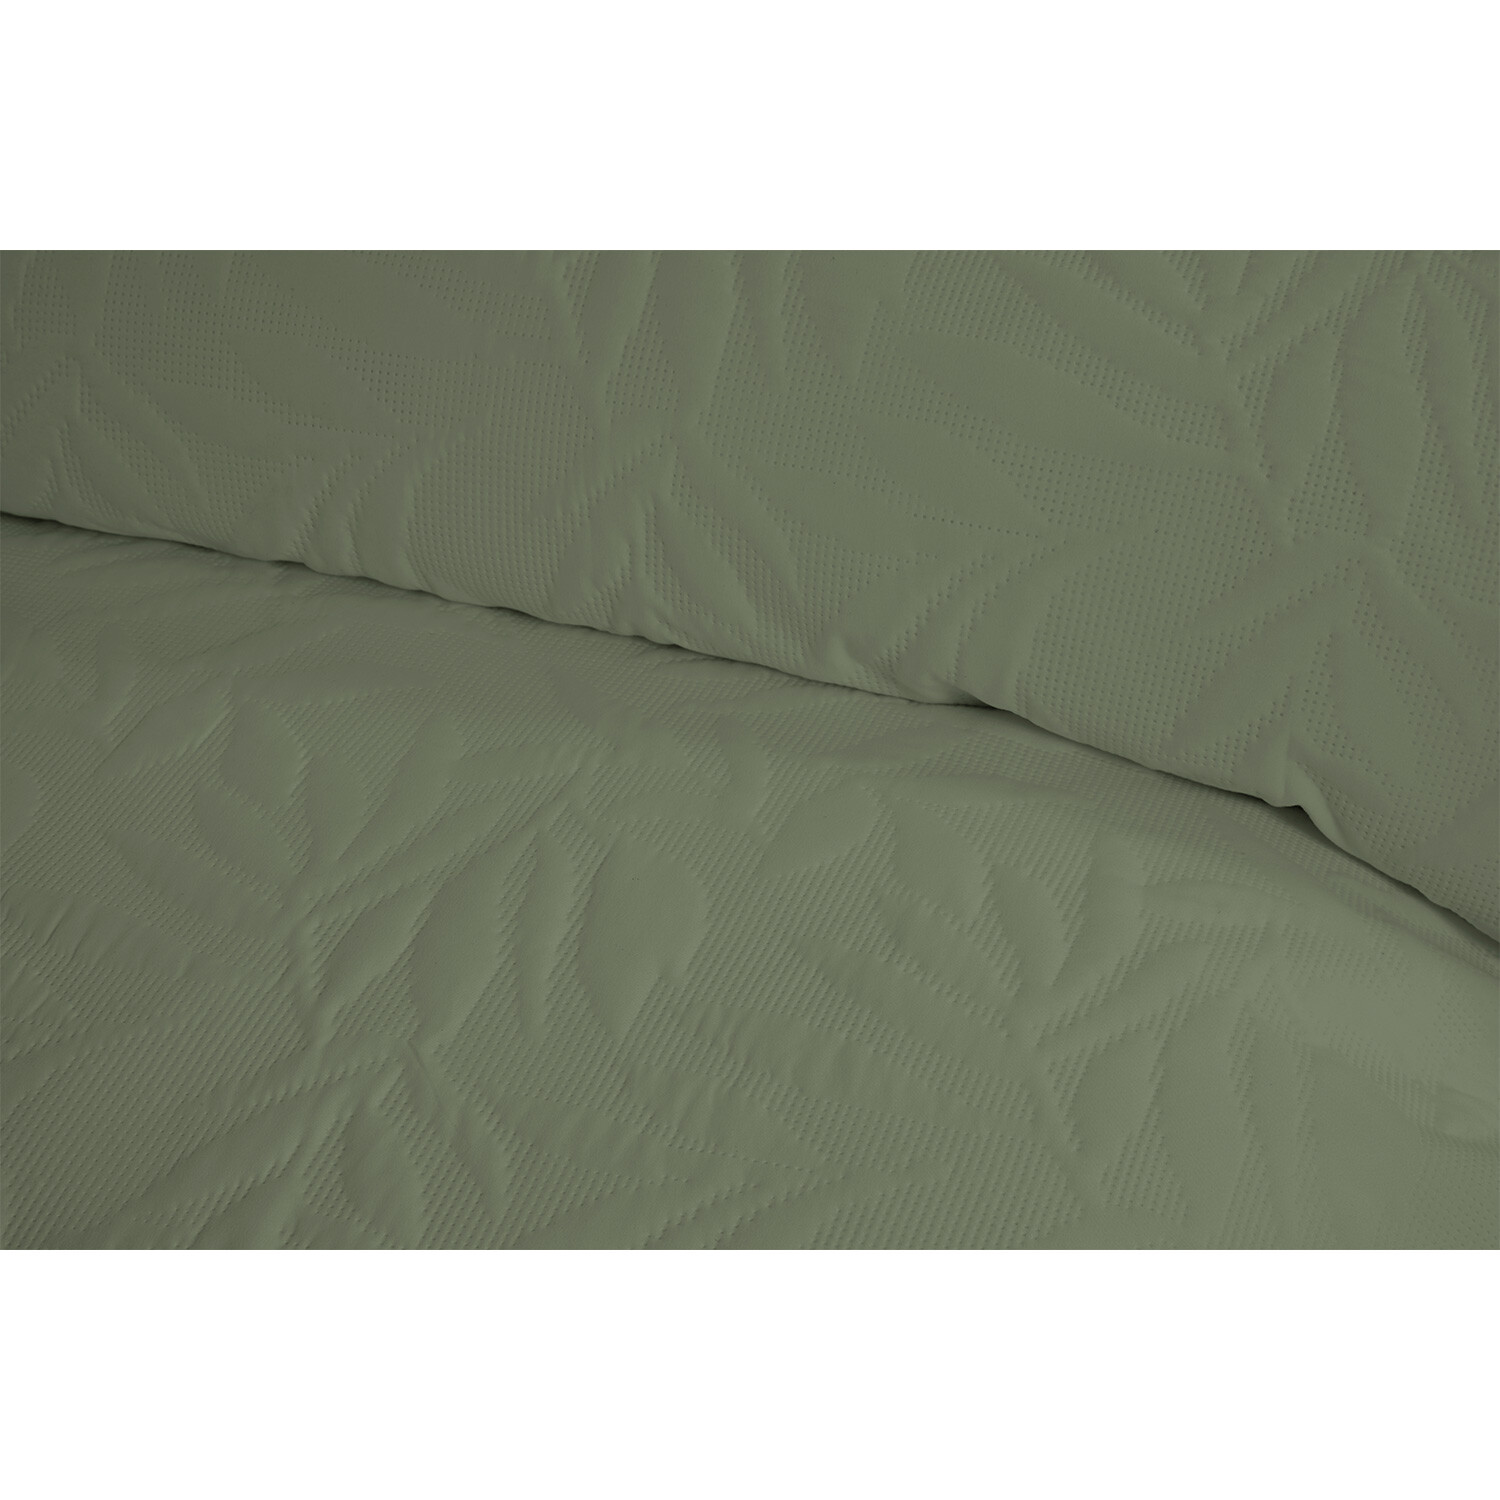 Avery Leaf Duvet Cover and Pillowcase Set - Olive Green / Double Image 3